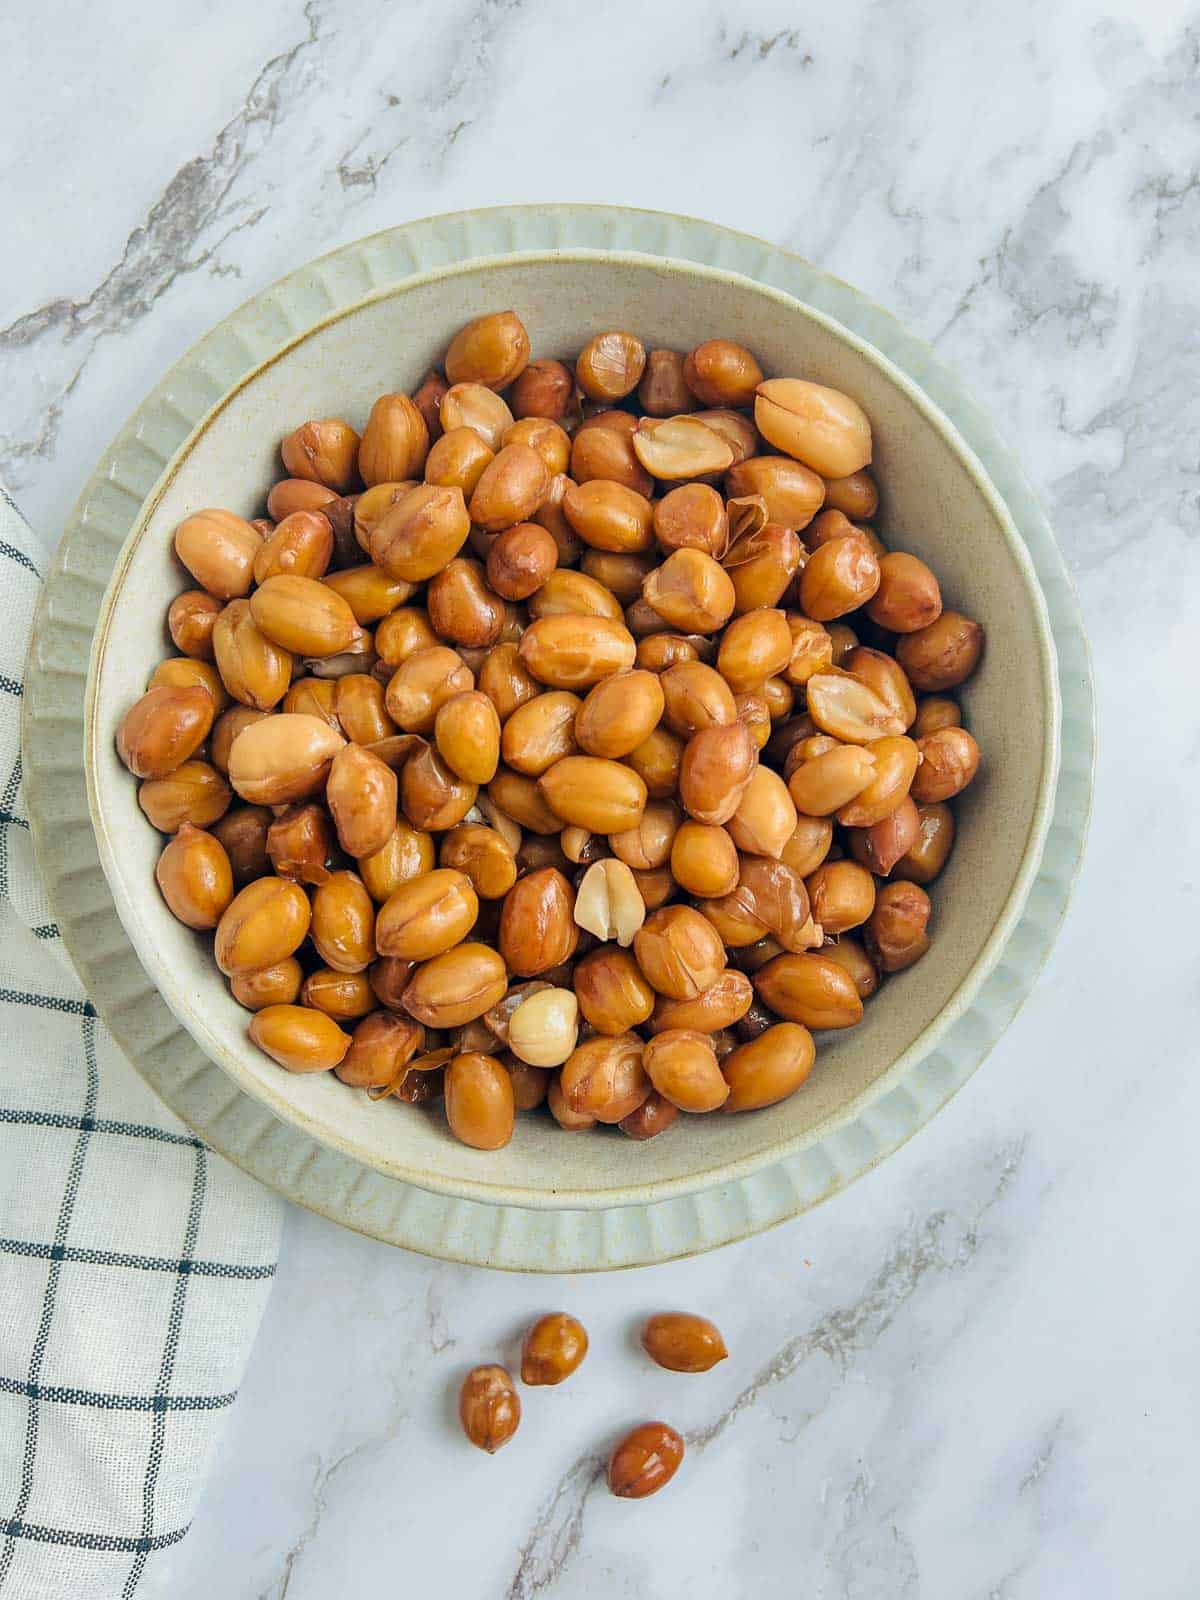 Boiled shelled peanuts in a white bowl.